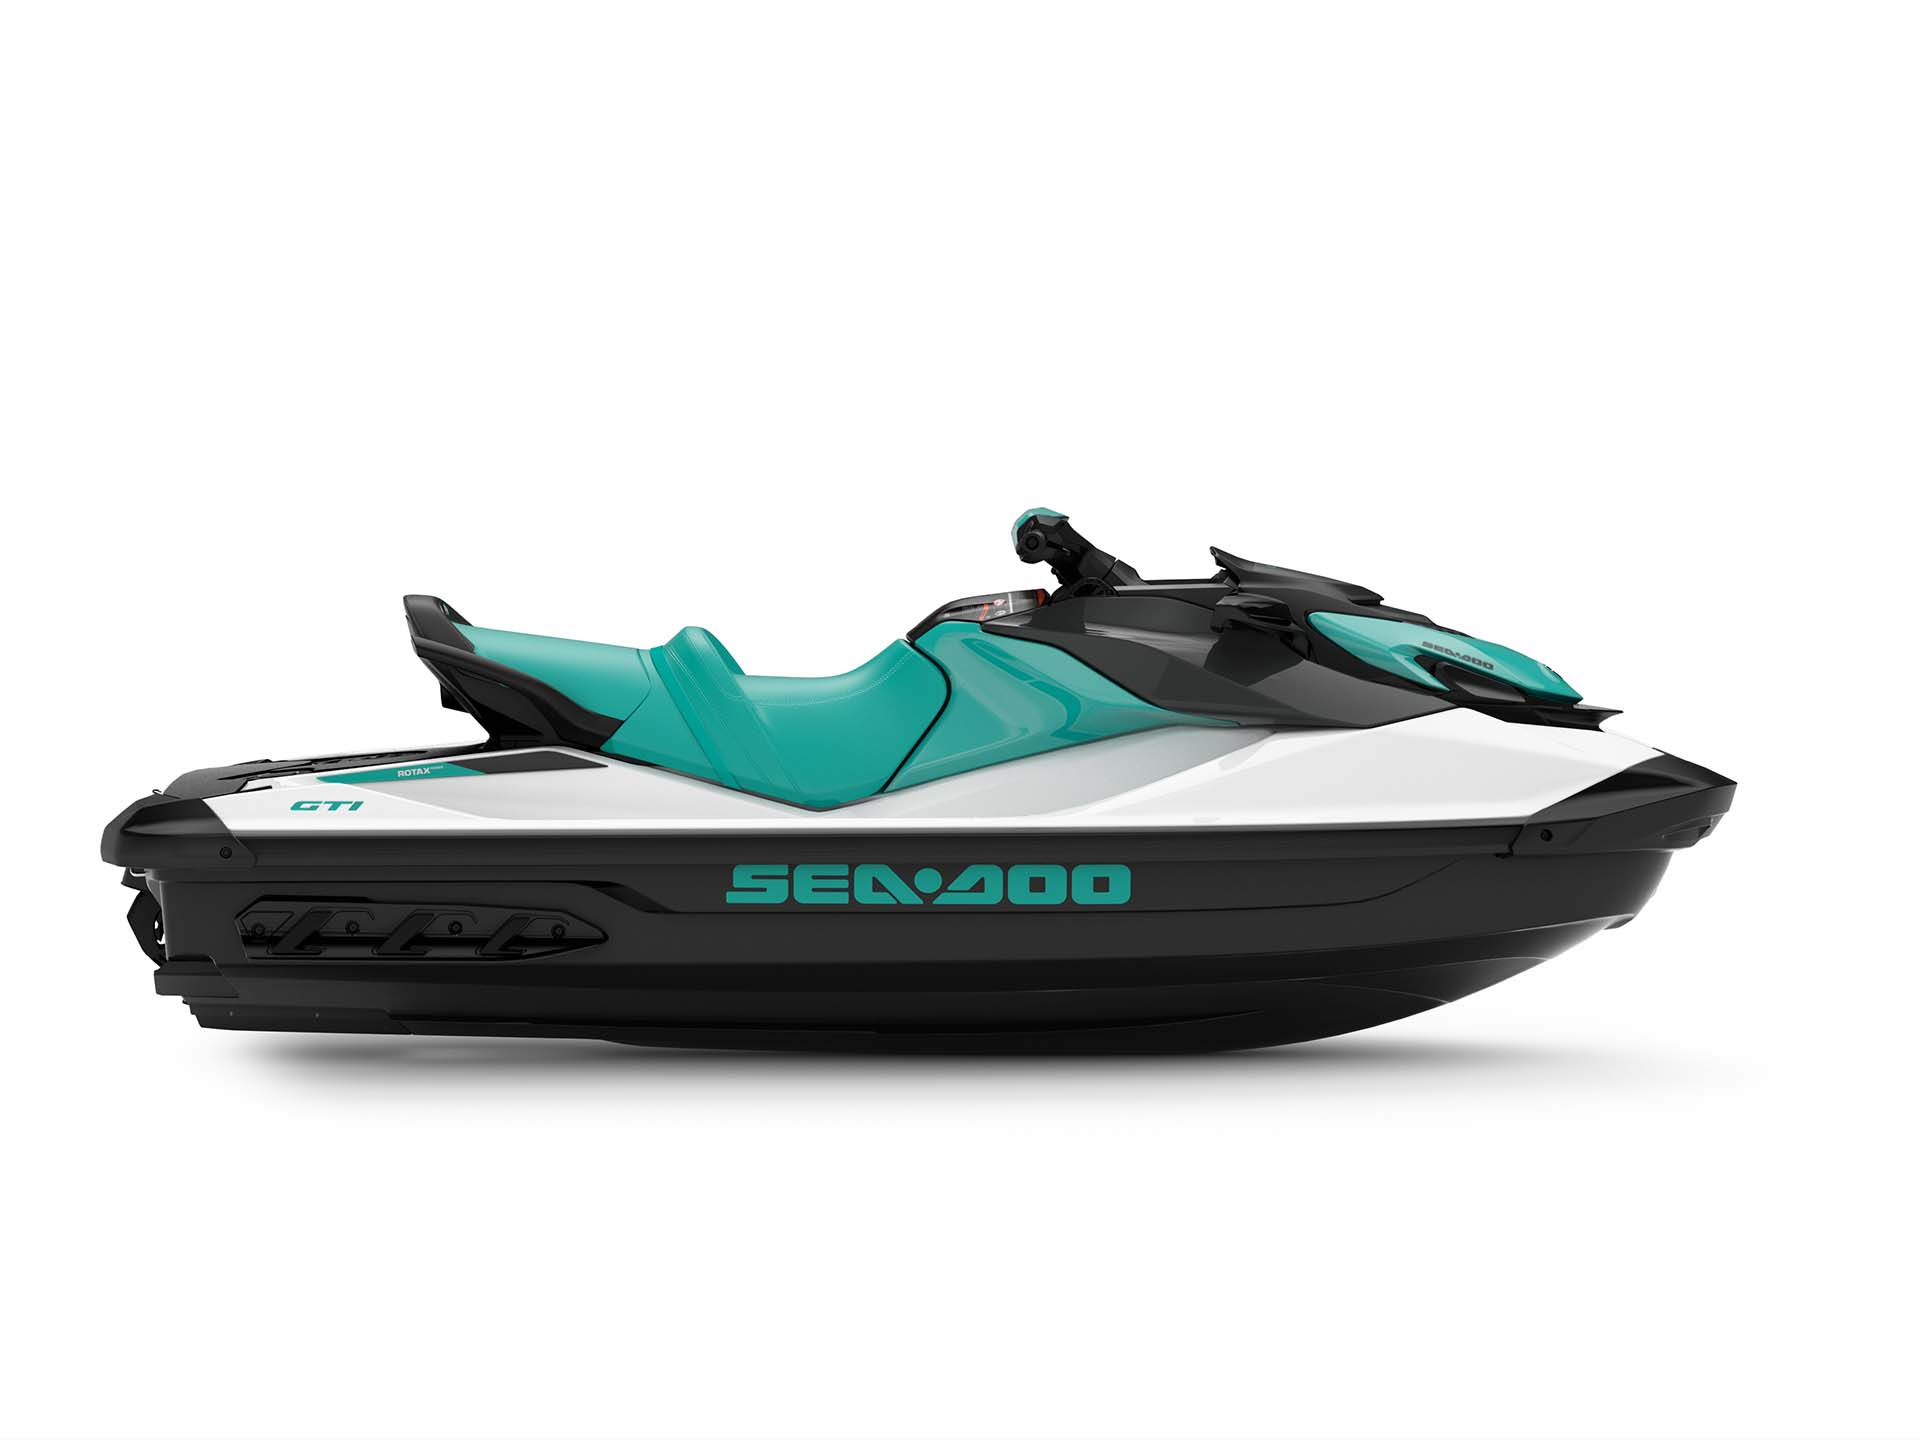 Discover the Sea-Doo lineup with Ray's Sport & Cycle